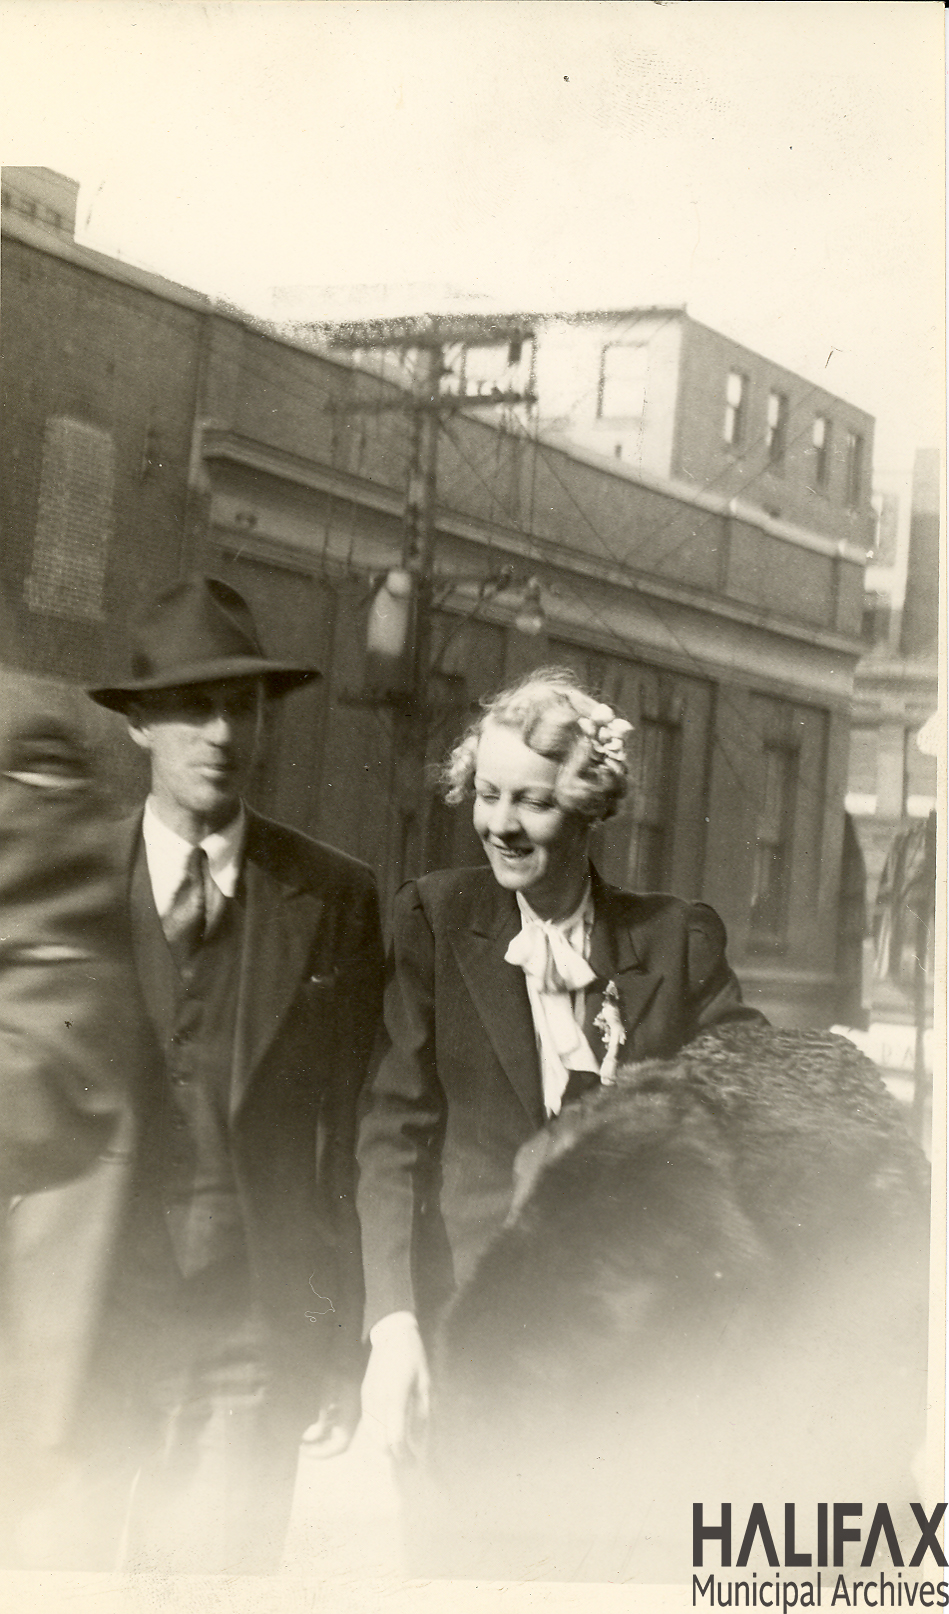 Black and white photograph of couple carrying merchandise